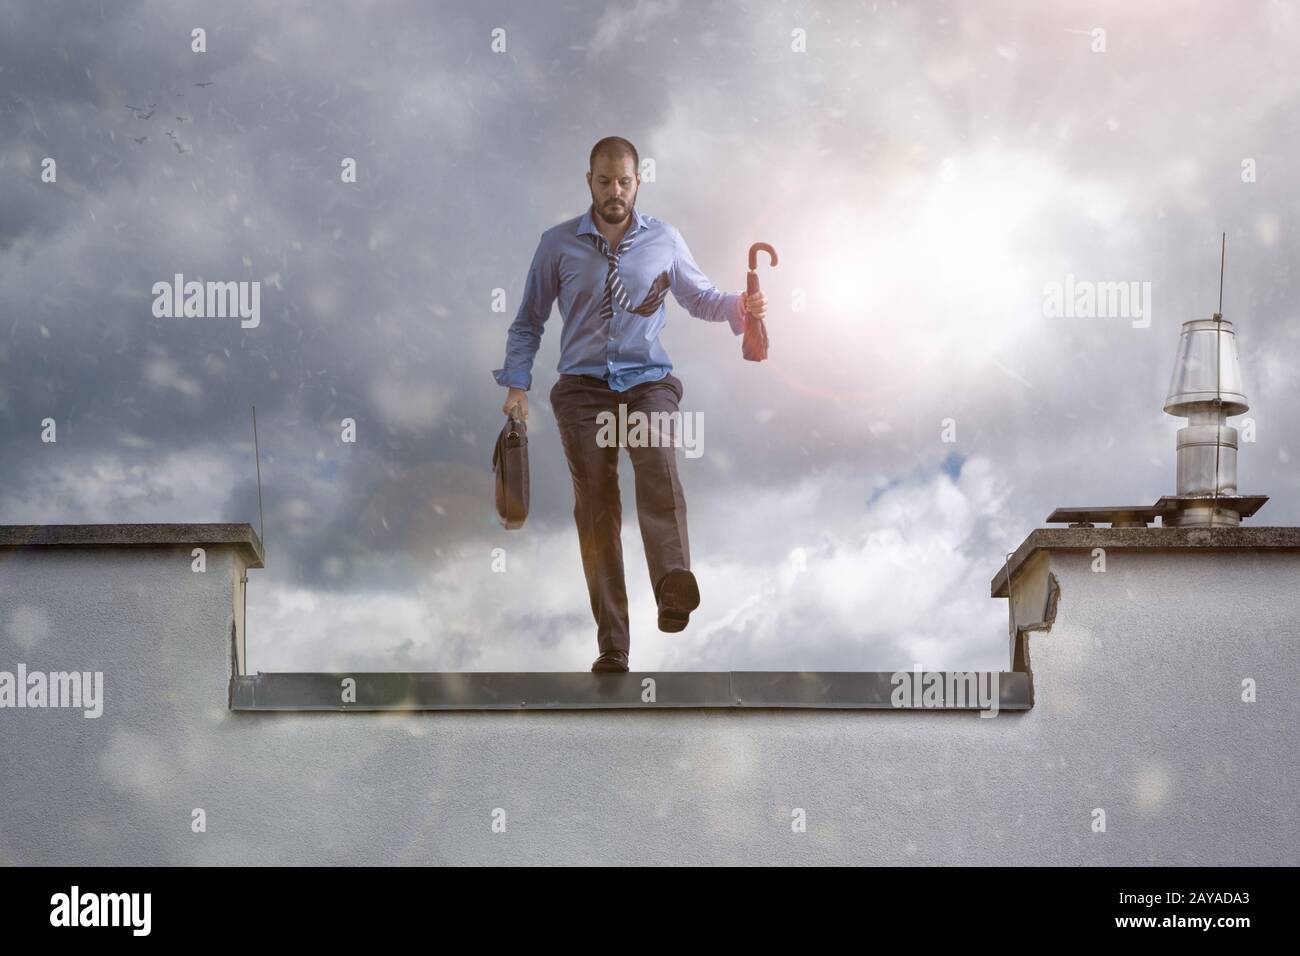 Businessman jumping from a skyscrapper and committing suicide. Business failure concept. Stock Photo